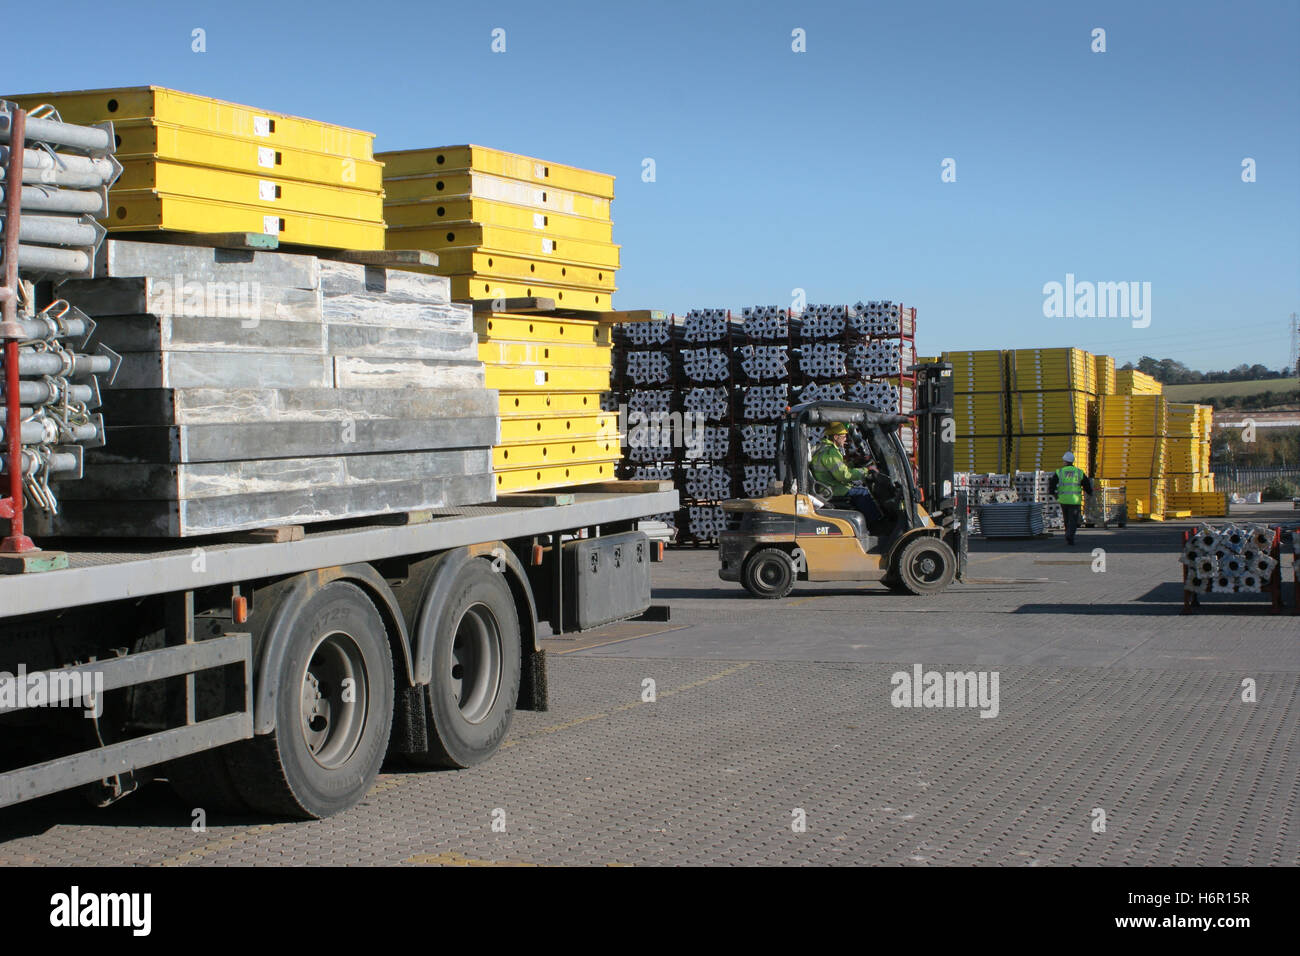 A forklift truck unloads steel formwork products from a flatbed lorry in a UK storage yard. Bright, sunny day. Stock Photo